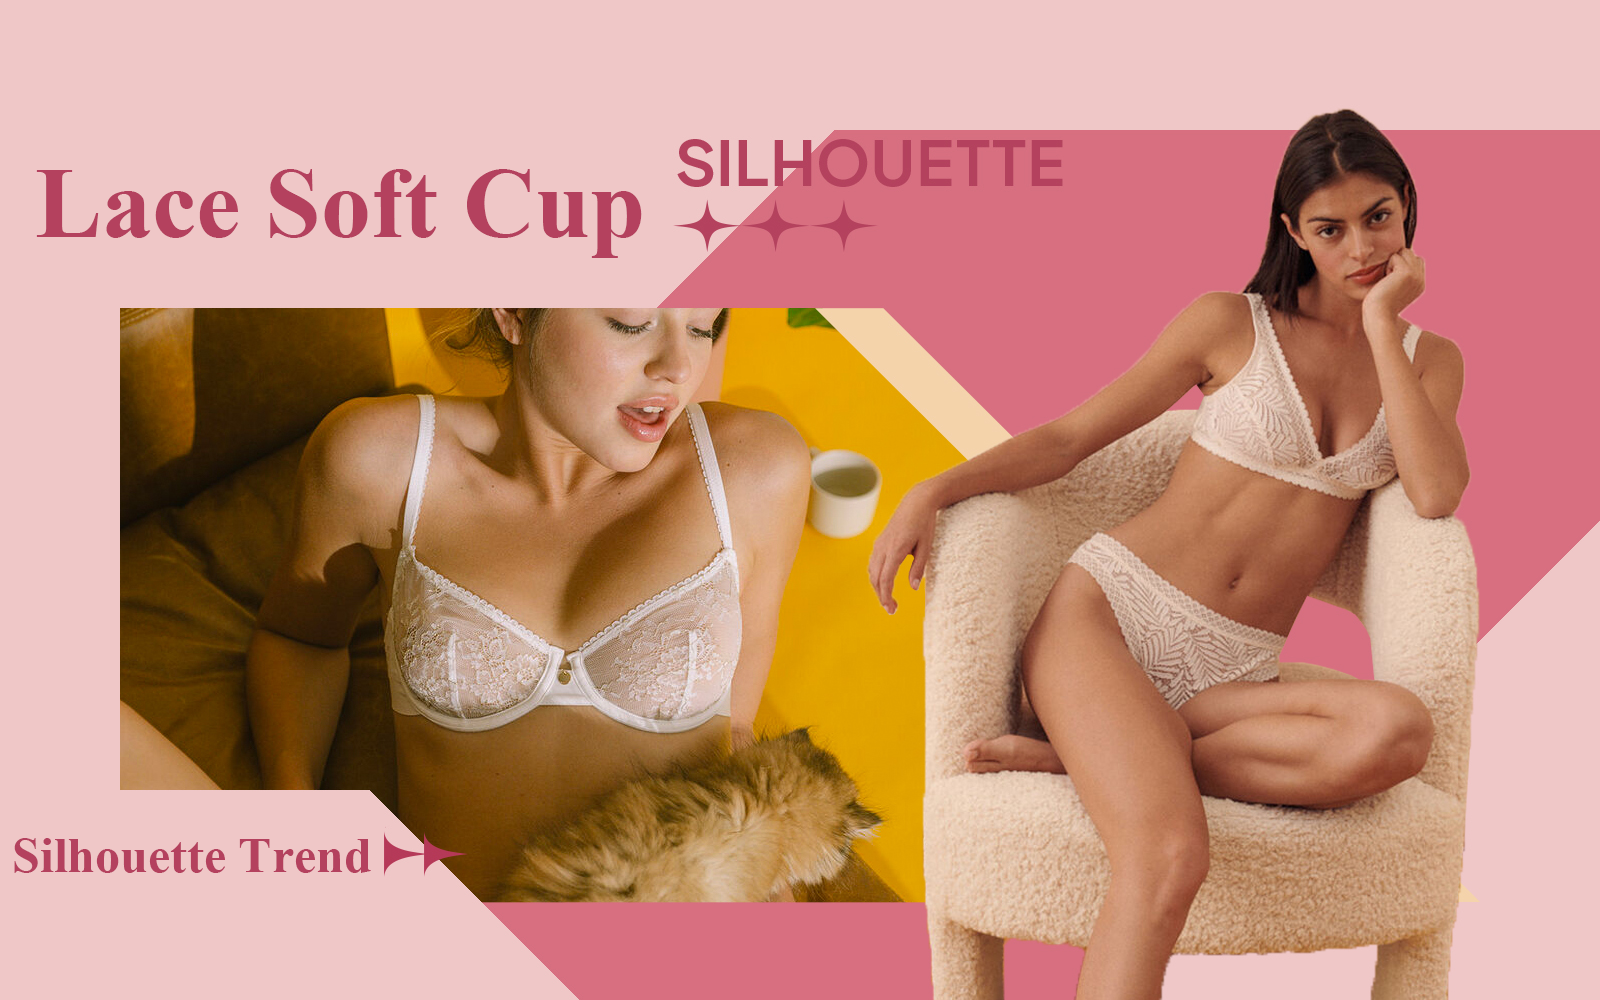 The Silhouette Trend for Soft Cup Lace Bra